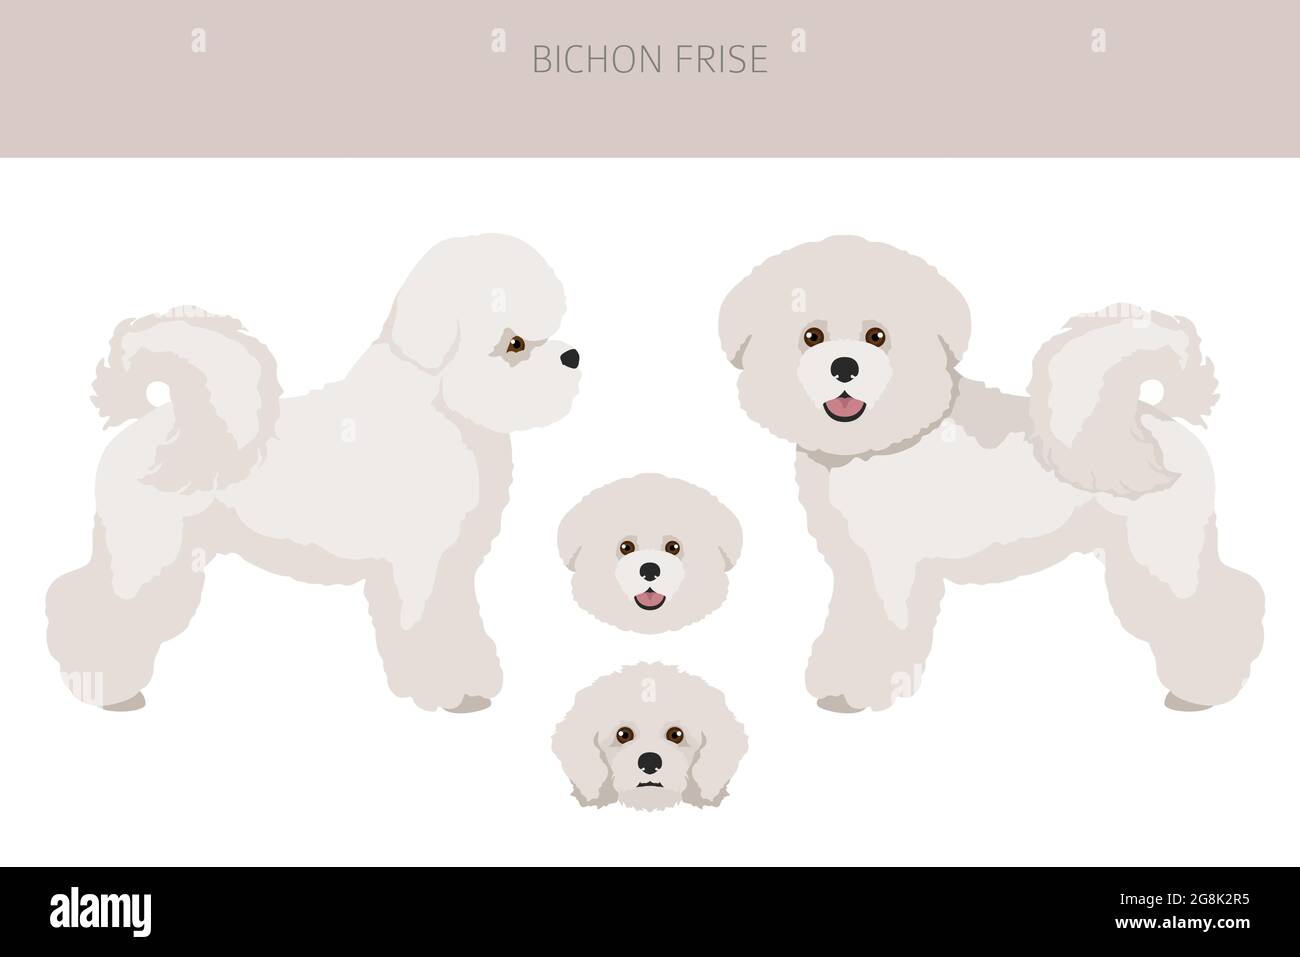 Bichon frise clipart. Different coat colors and poses set.  Vector illustration Stock Vector